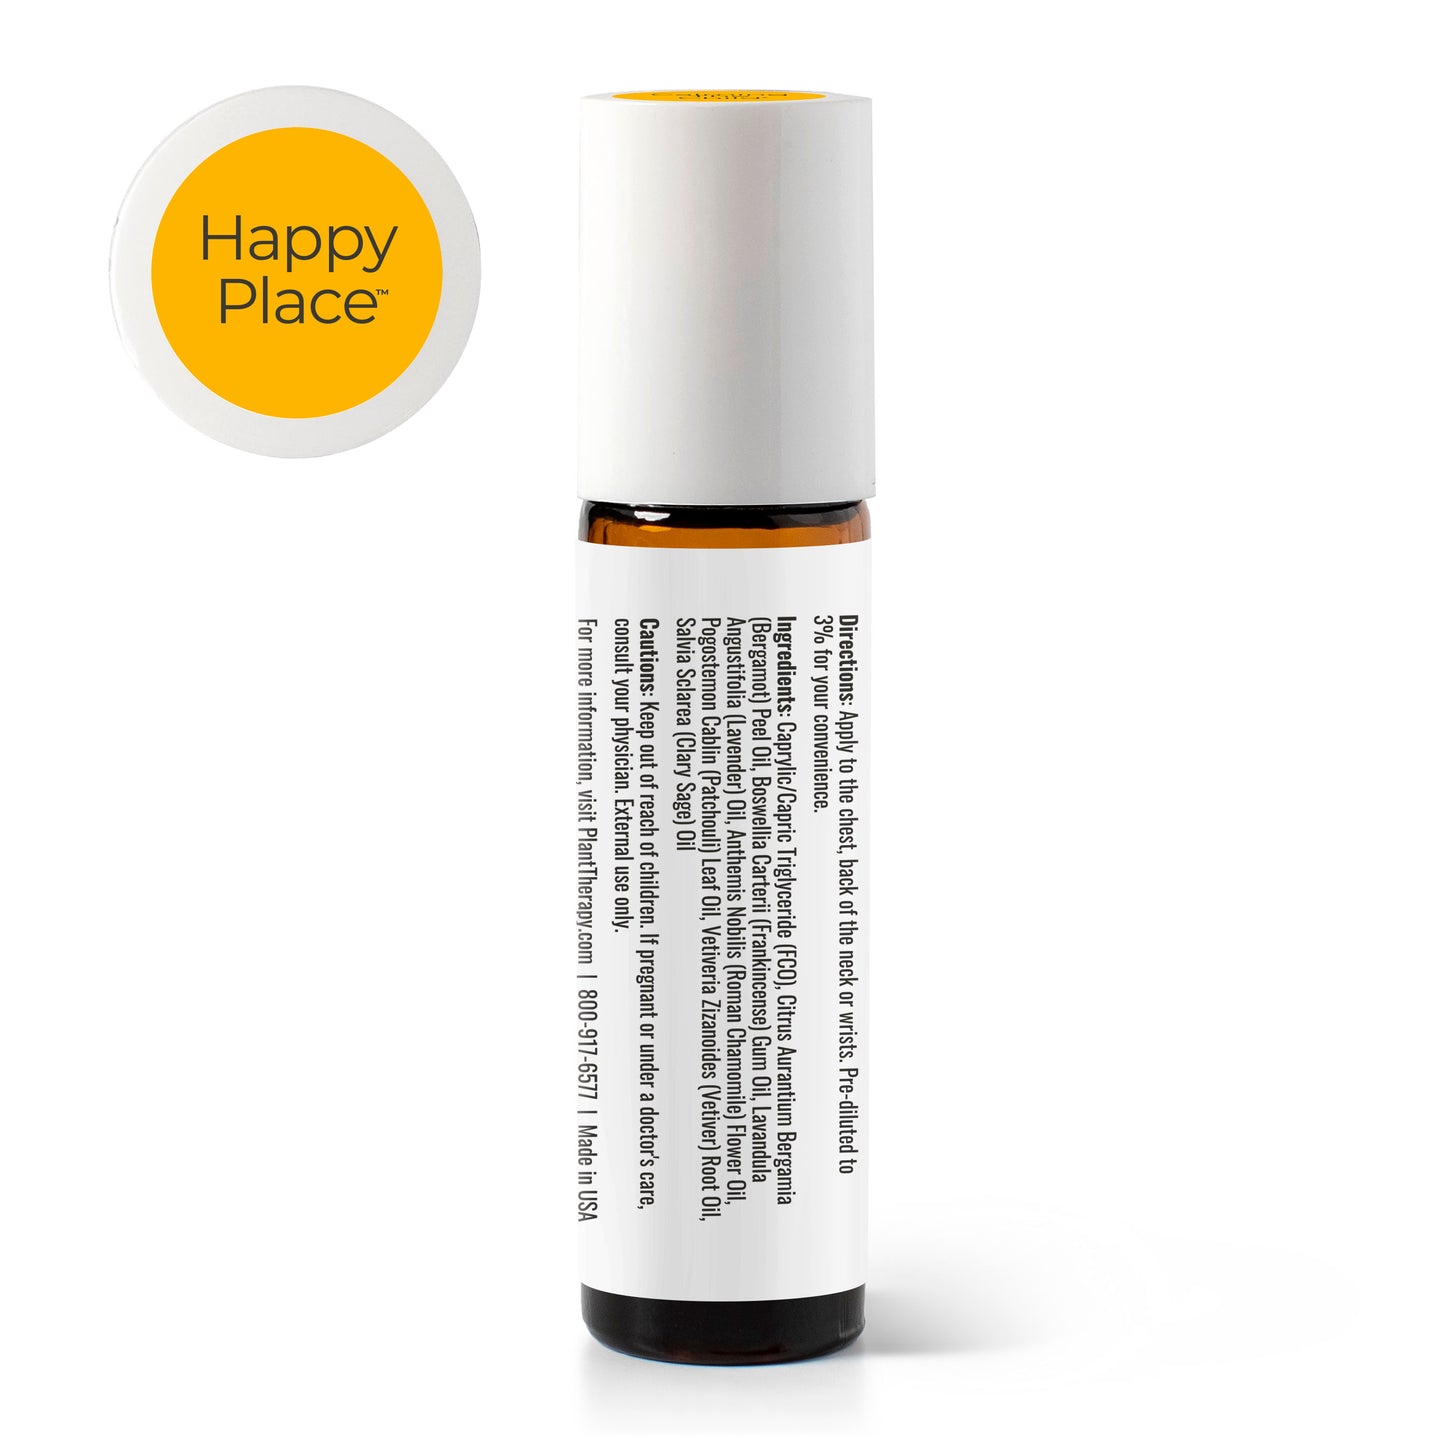 Happy Place KidSafe Essential Oil Pre-Diluted Roll-On